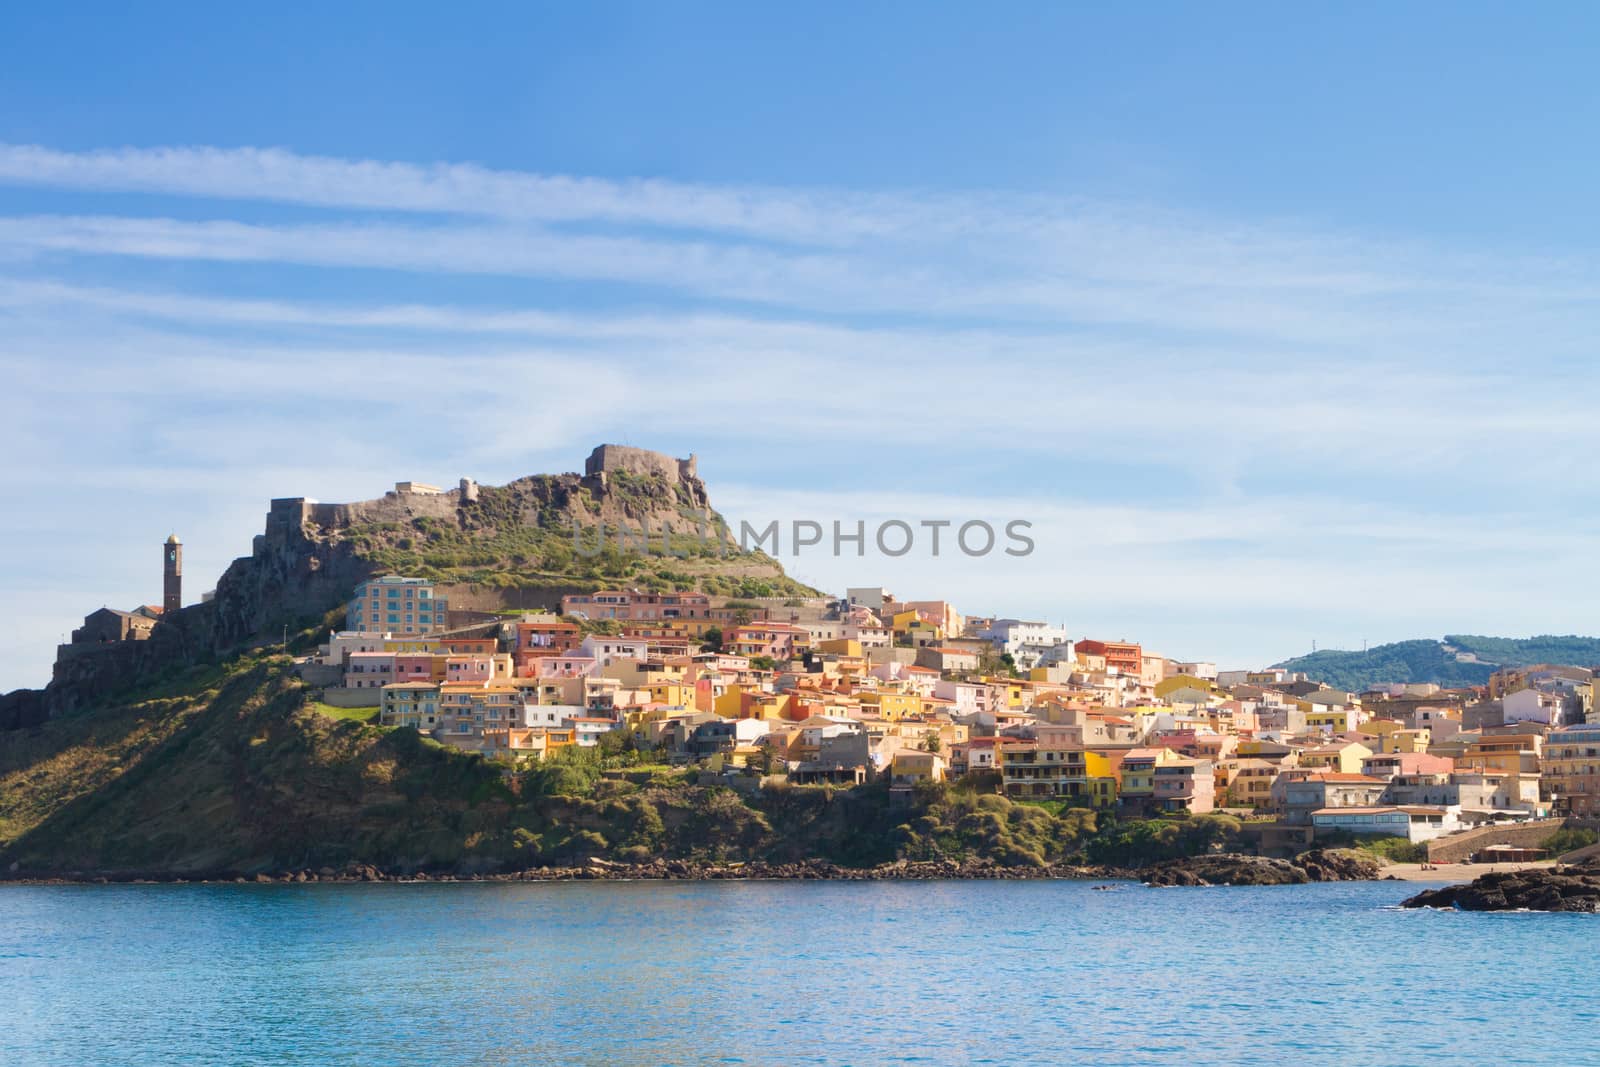 Castelsardo is a touristic town and comune in Sardinia, Italy, located in the northwest of the island within the Province of Sassari, at the east end of the Gulf of Asinara.